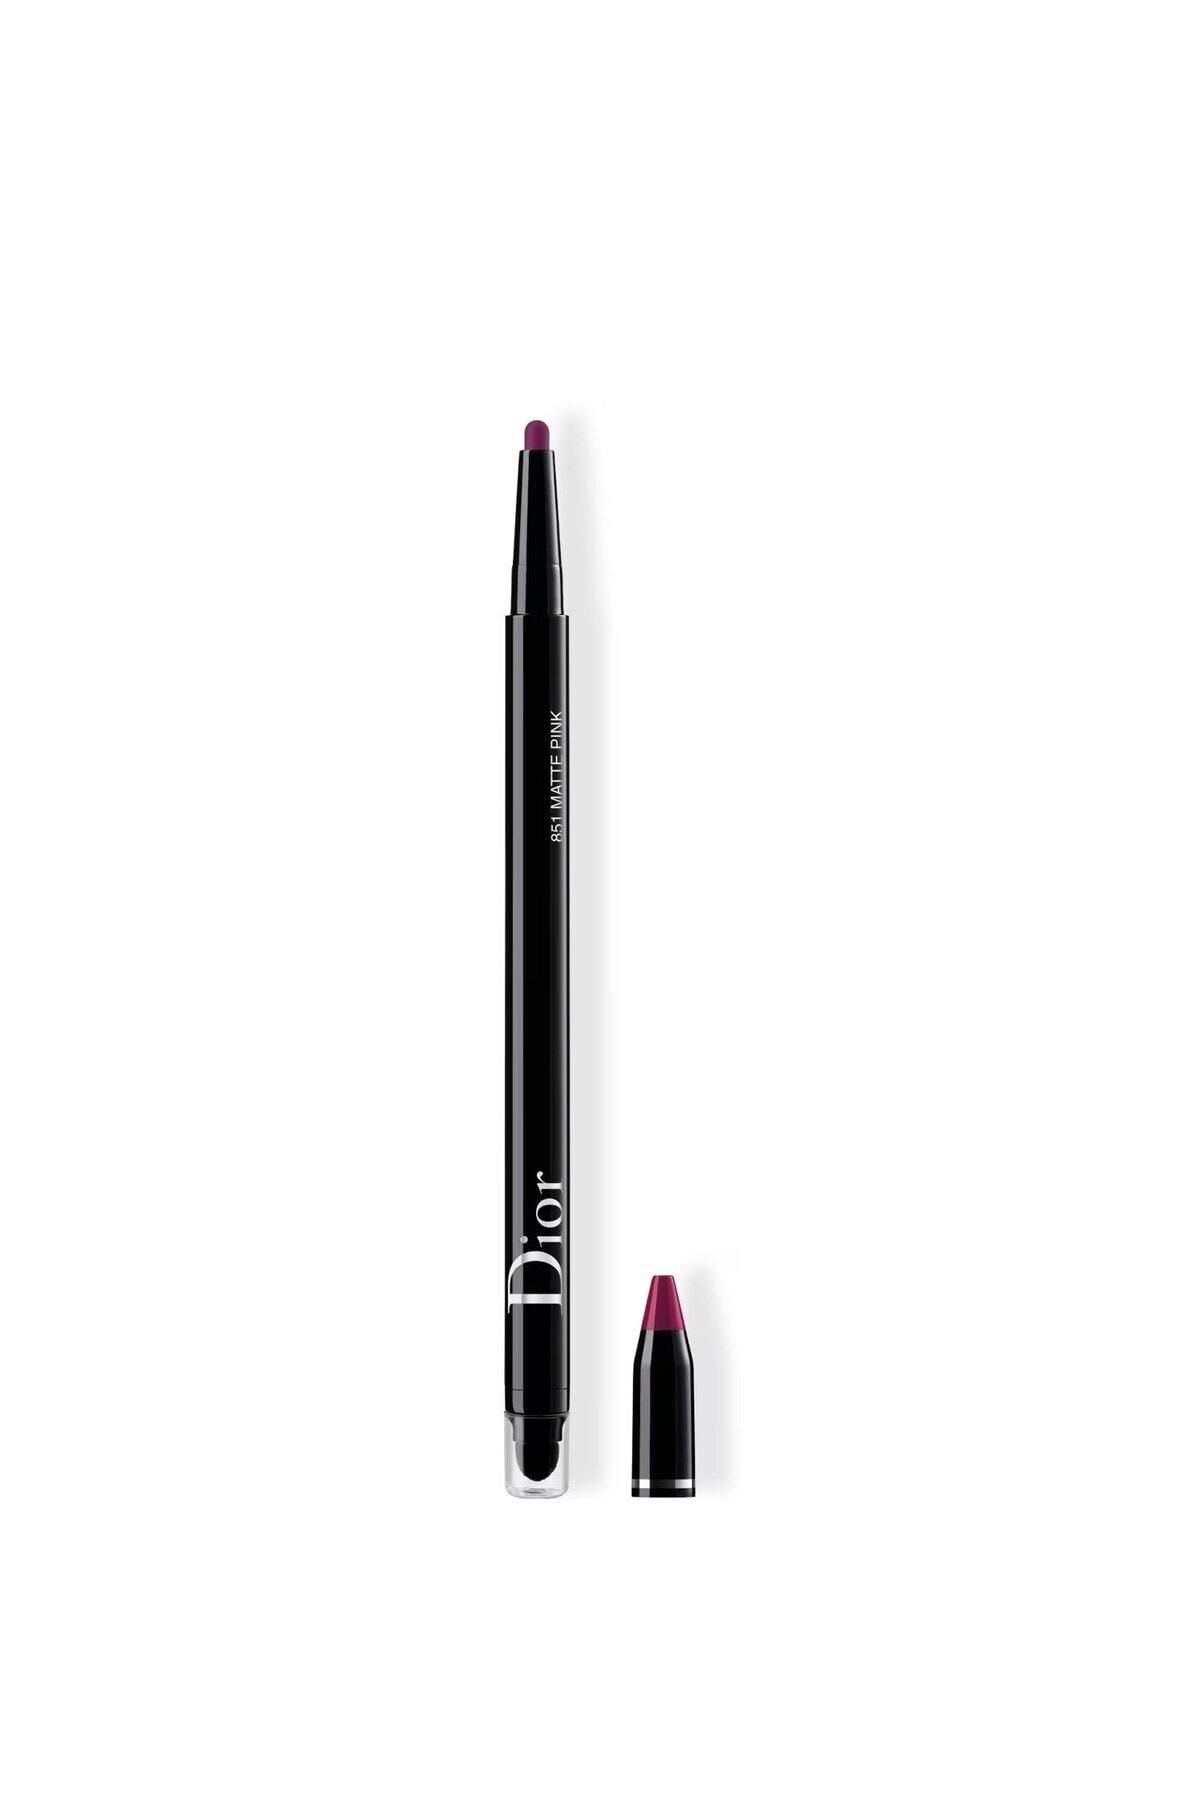 Dior 24H* STYLO WATERPROOF - 24 HOUR LASTİNG AND HİGH DENSİTY APPEARANCE EYELİNER PSSN1958